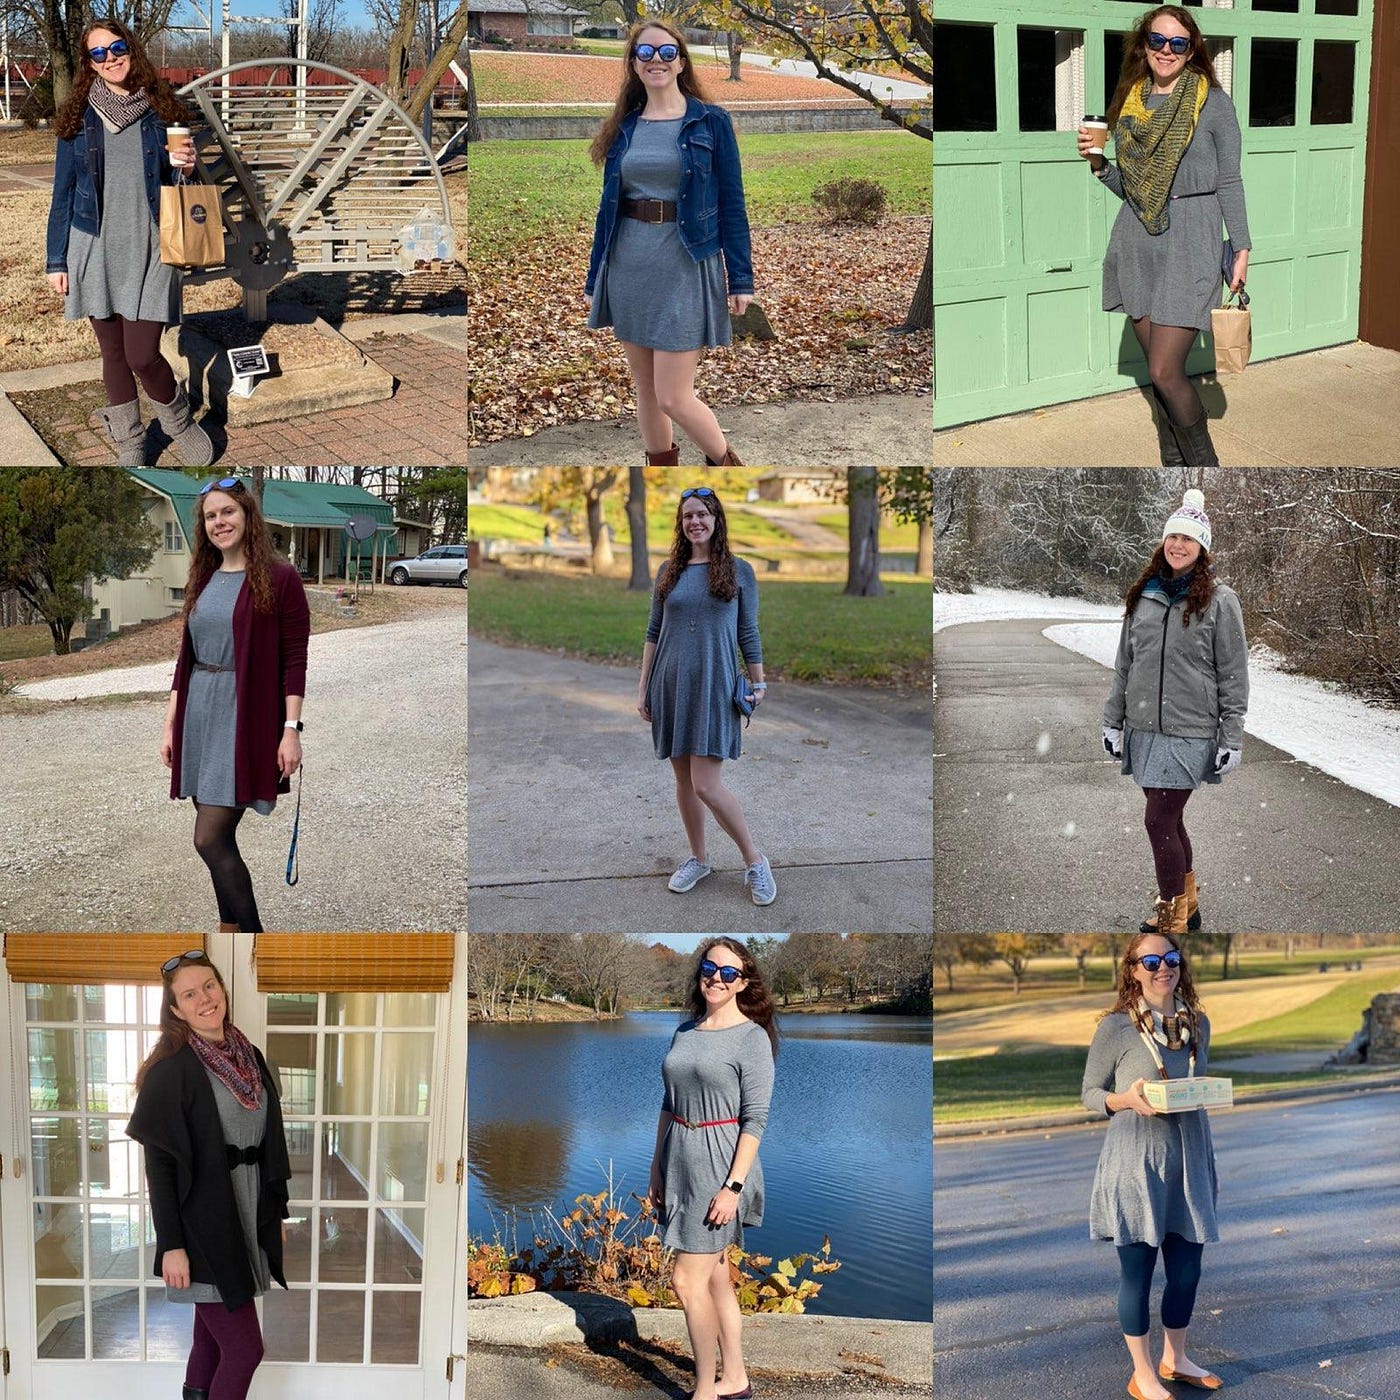 What I Learned By Wearing the Same Dress for 100 Days in a Row